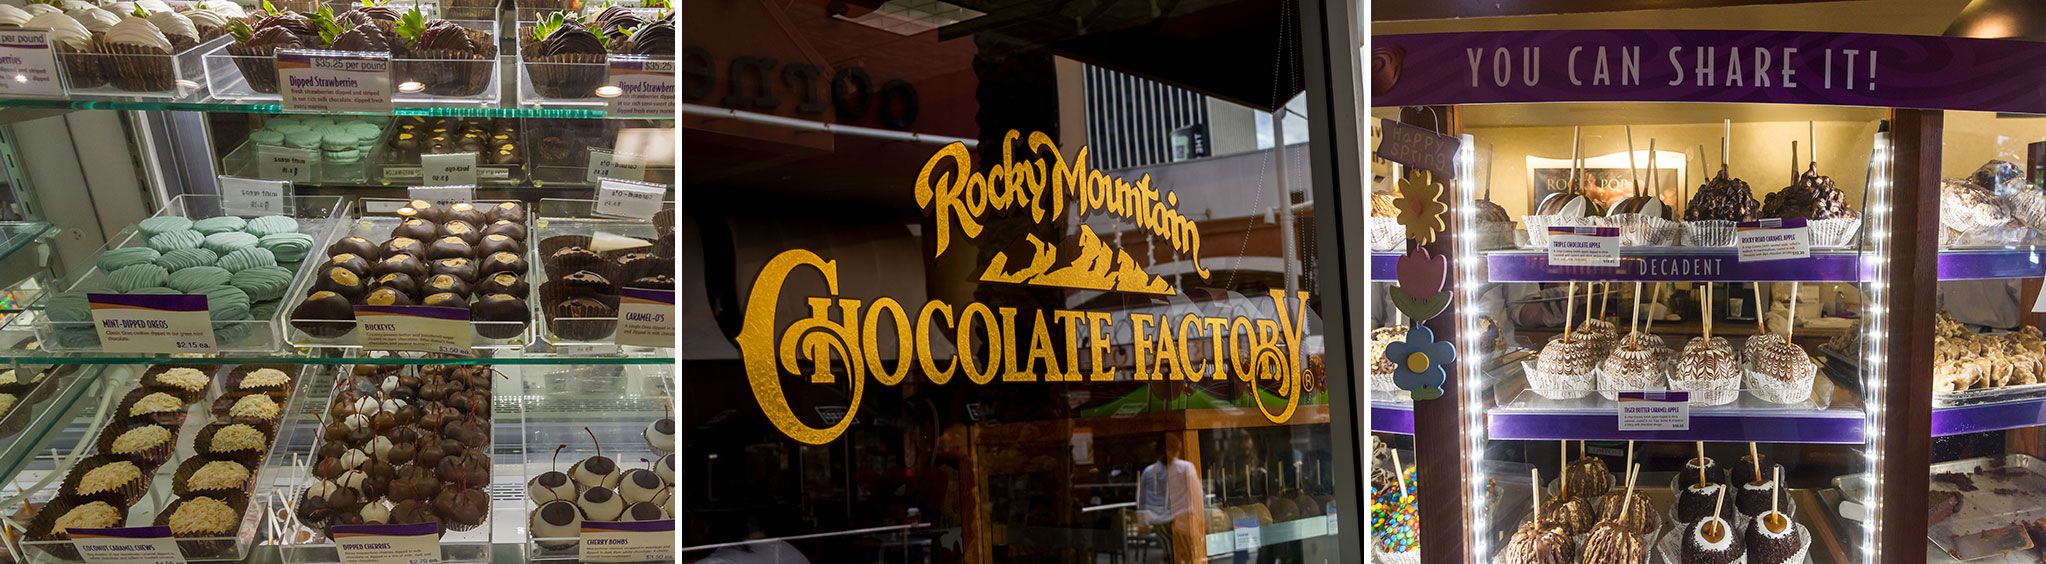 Rocky Mountain Chocolate Factory at Opry Mills